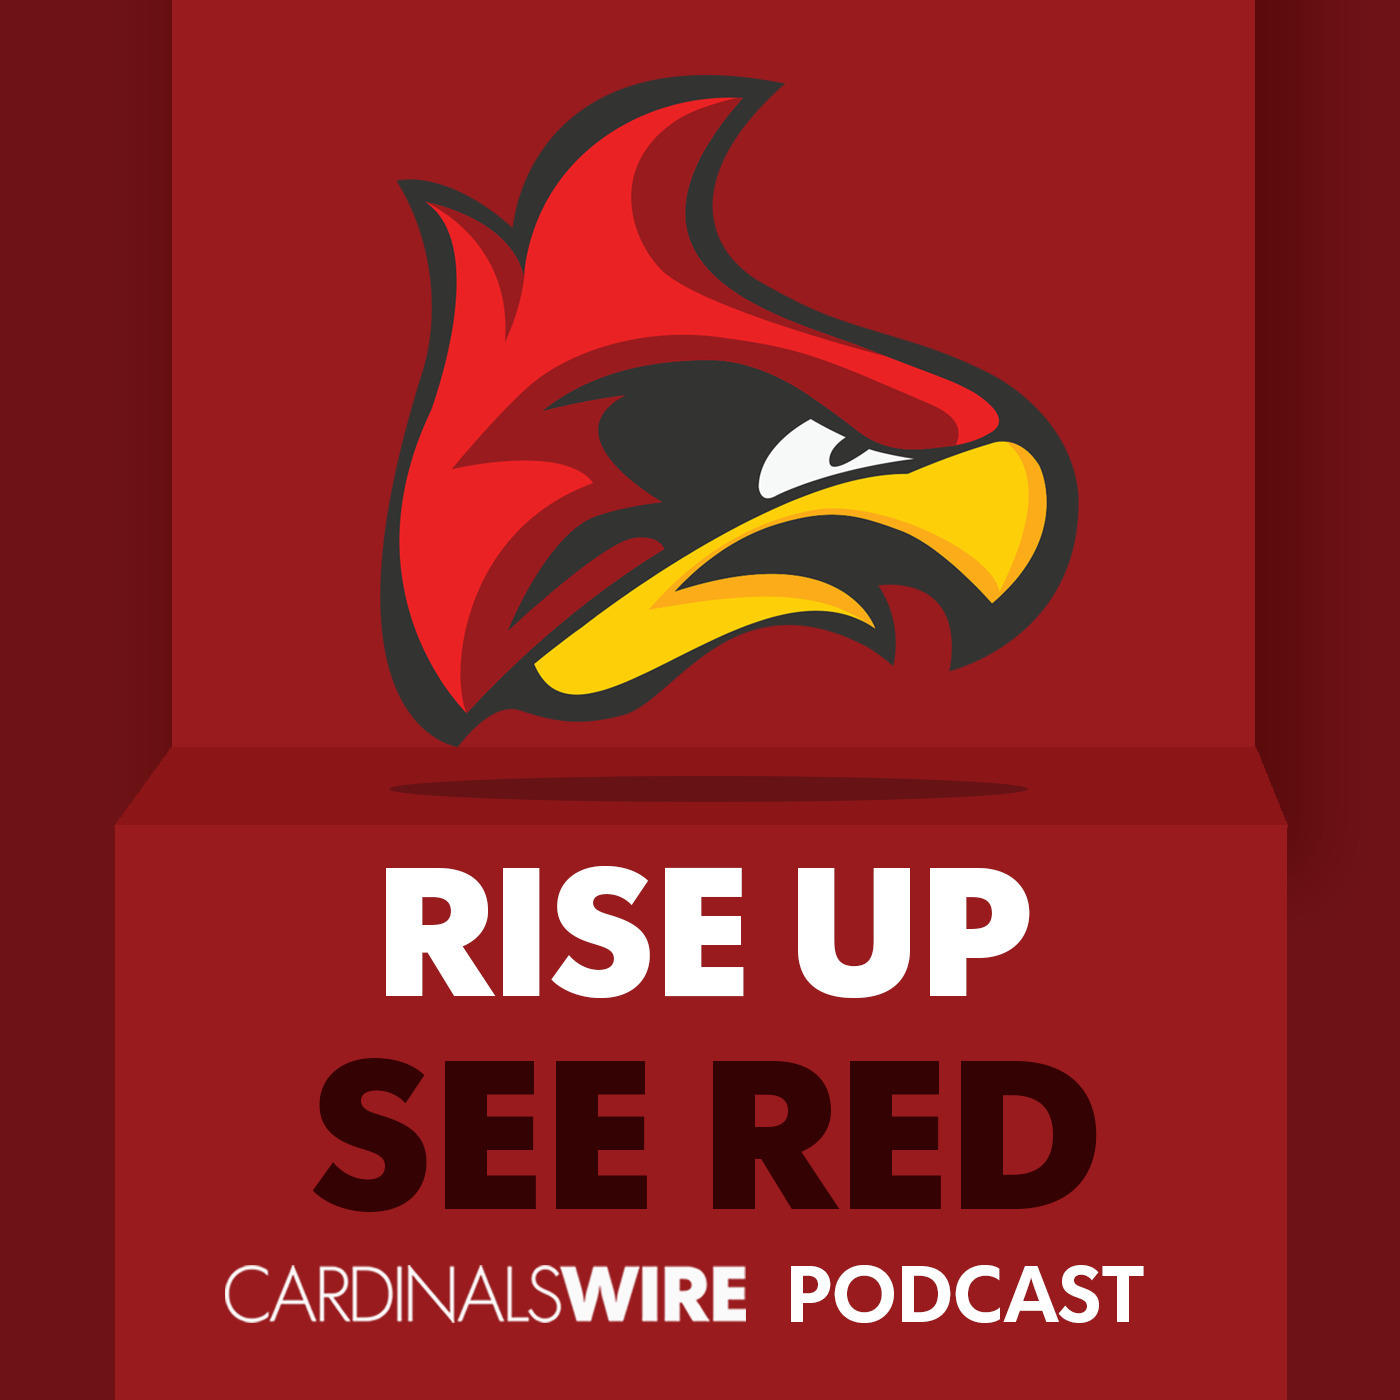 Hasson Reddick's historic game, the Cardinals' win, a new OL starter and Week 15 preview